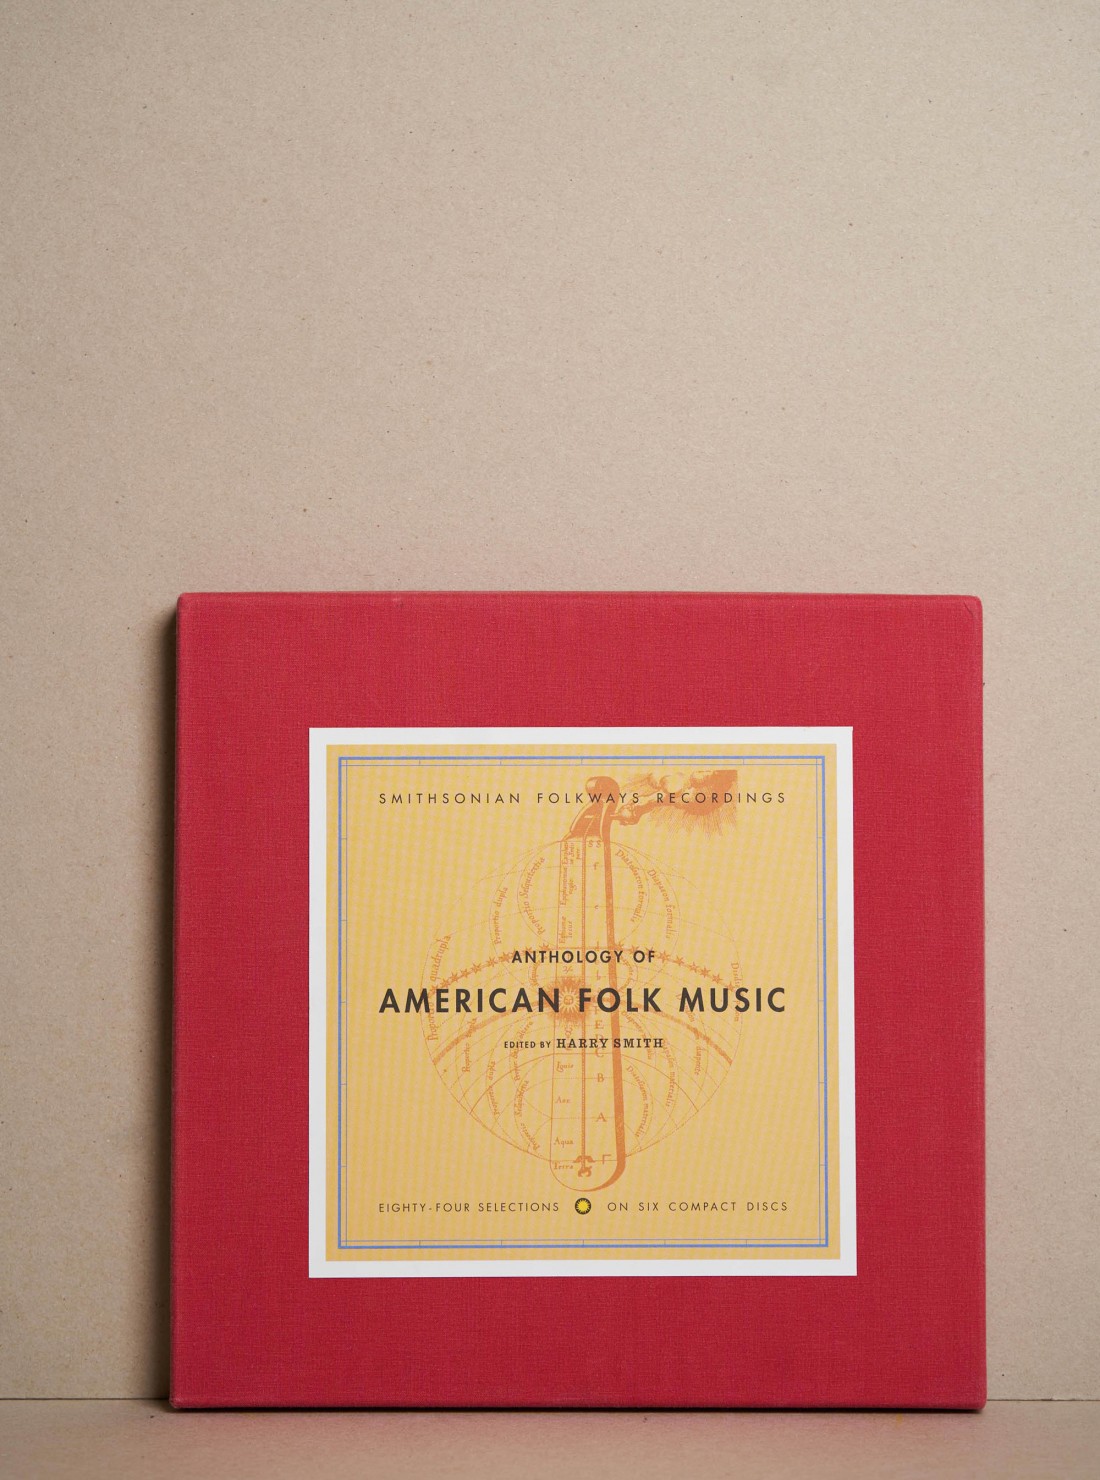 Harry Smith / Anthology Of American...